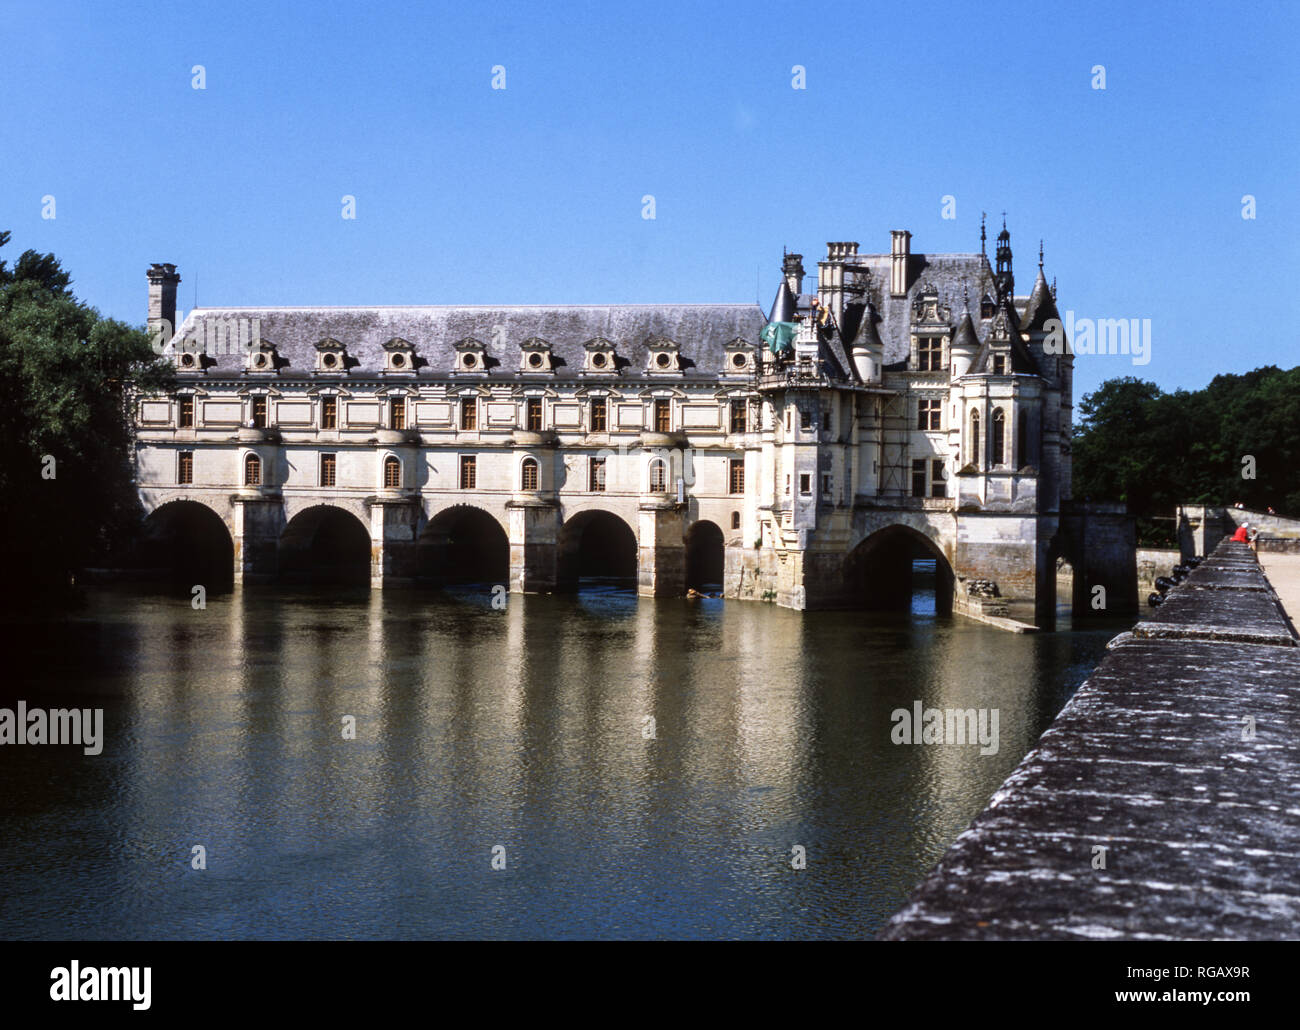 Chenonceau Chateau. France.Dept Indre et Loire.The chateau dates from the 15th century and spans the River Cher. Stock Photo